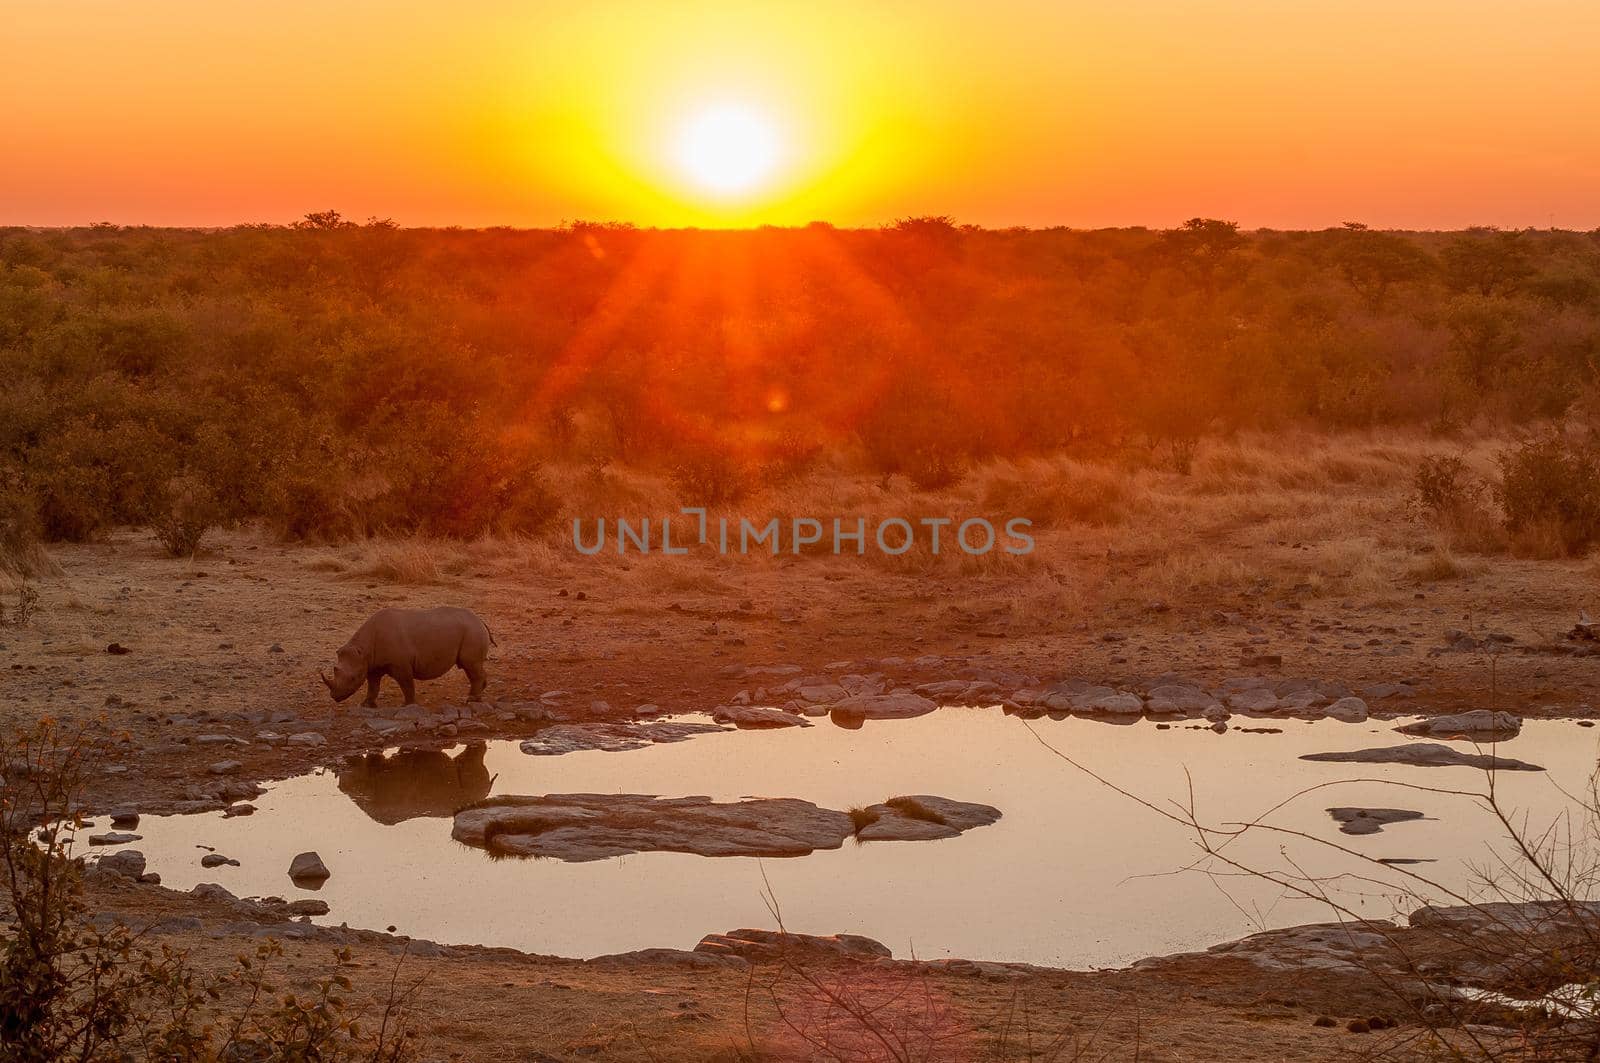 Black rhinoceros, browser with a sunset backdrop at a waterhole by dpreezg